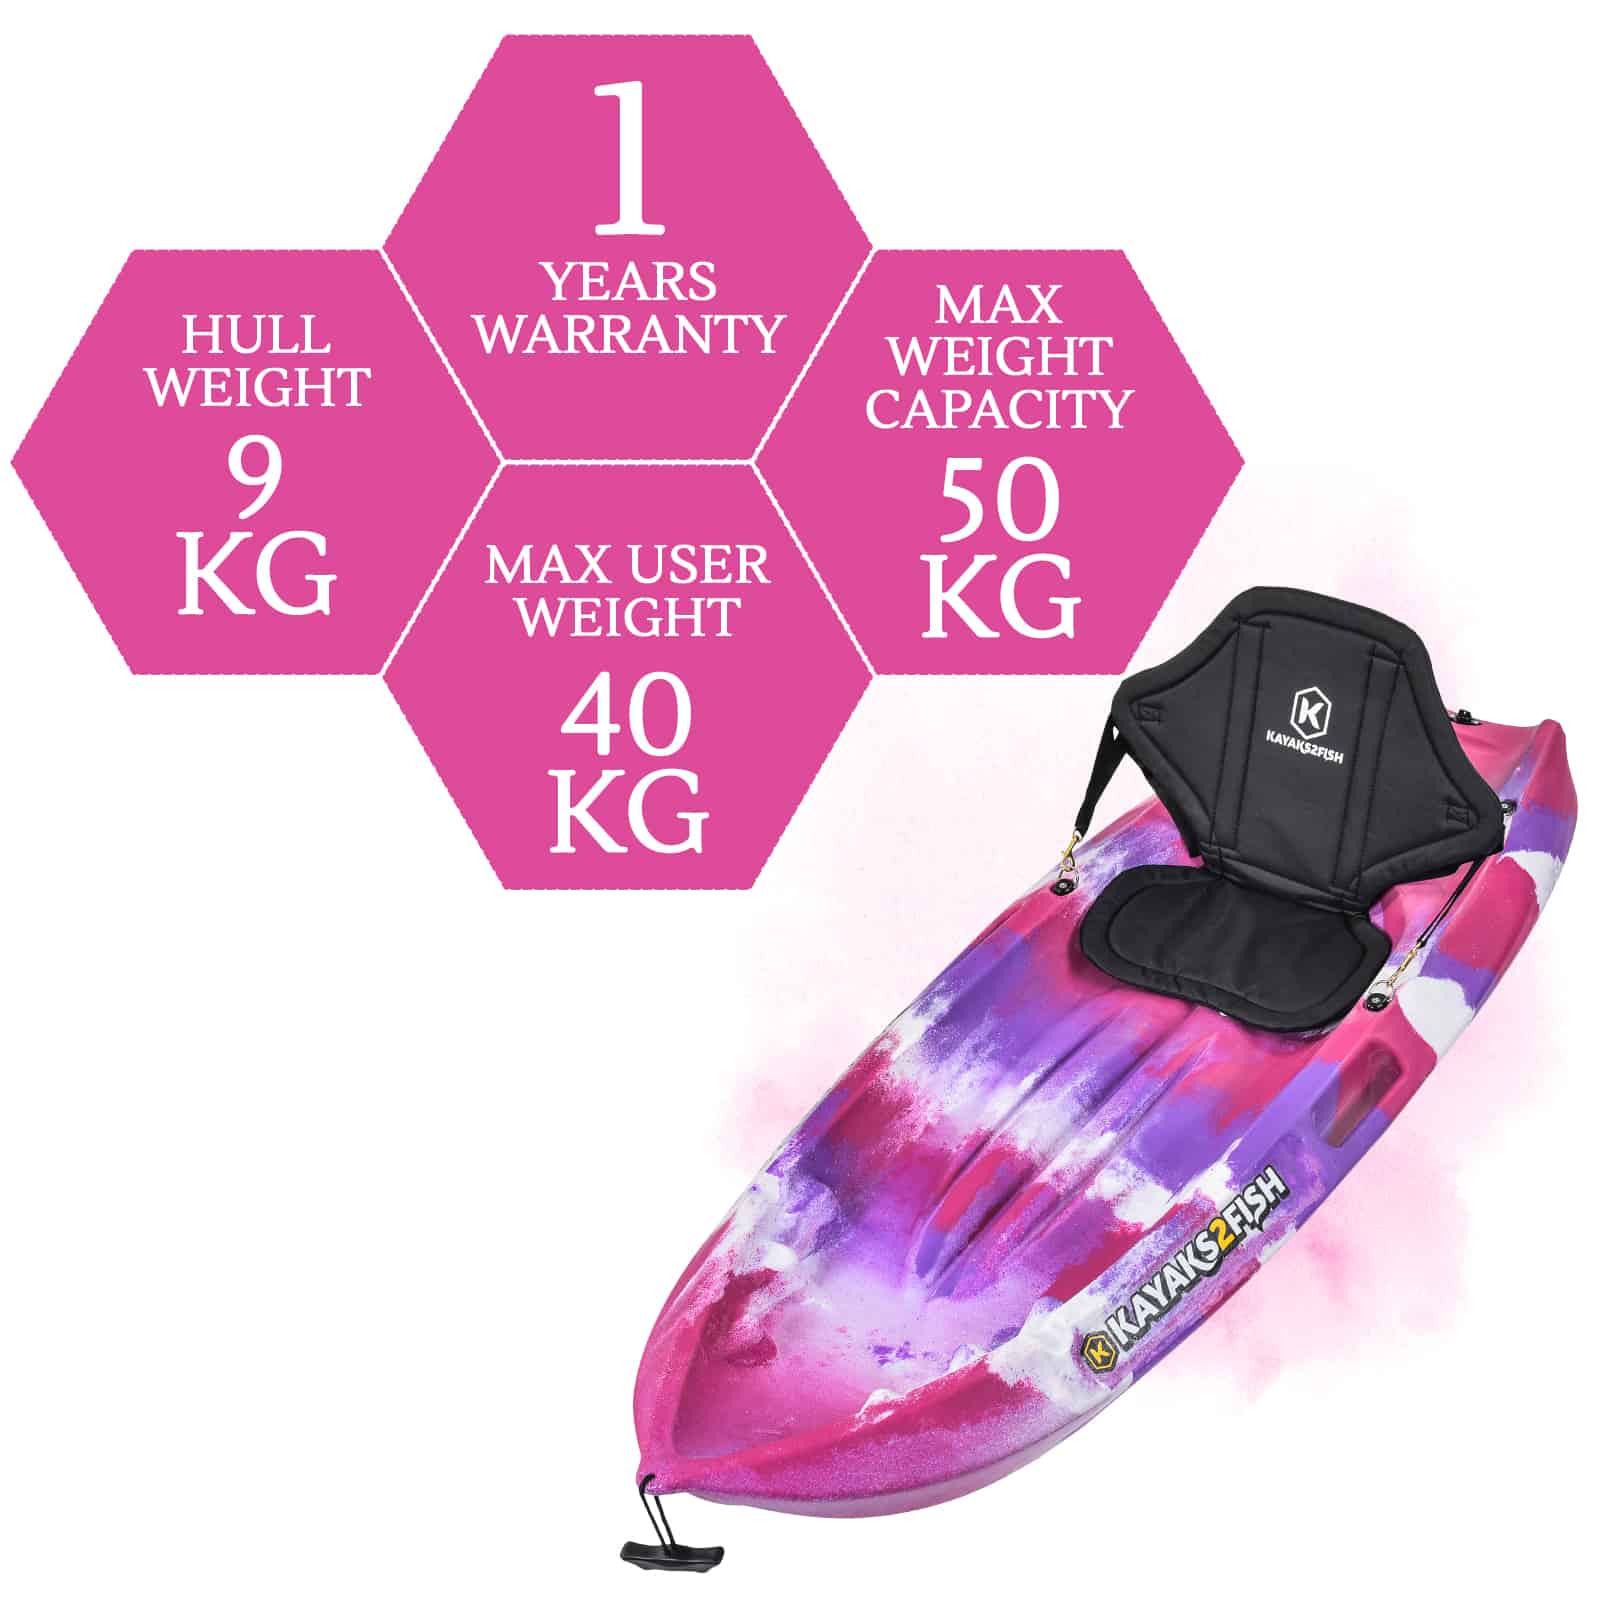 K2FS-PUFFIN-PINKCAMO specifications